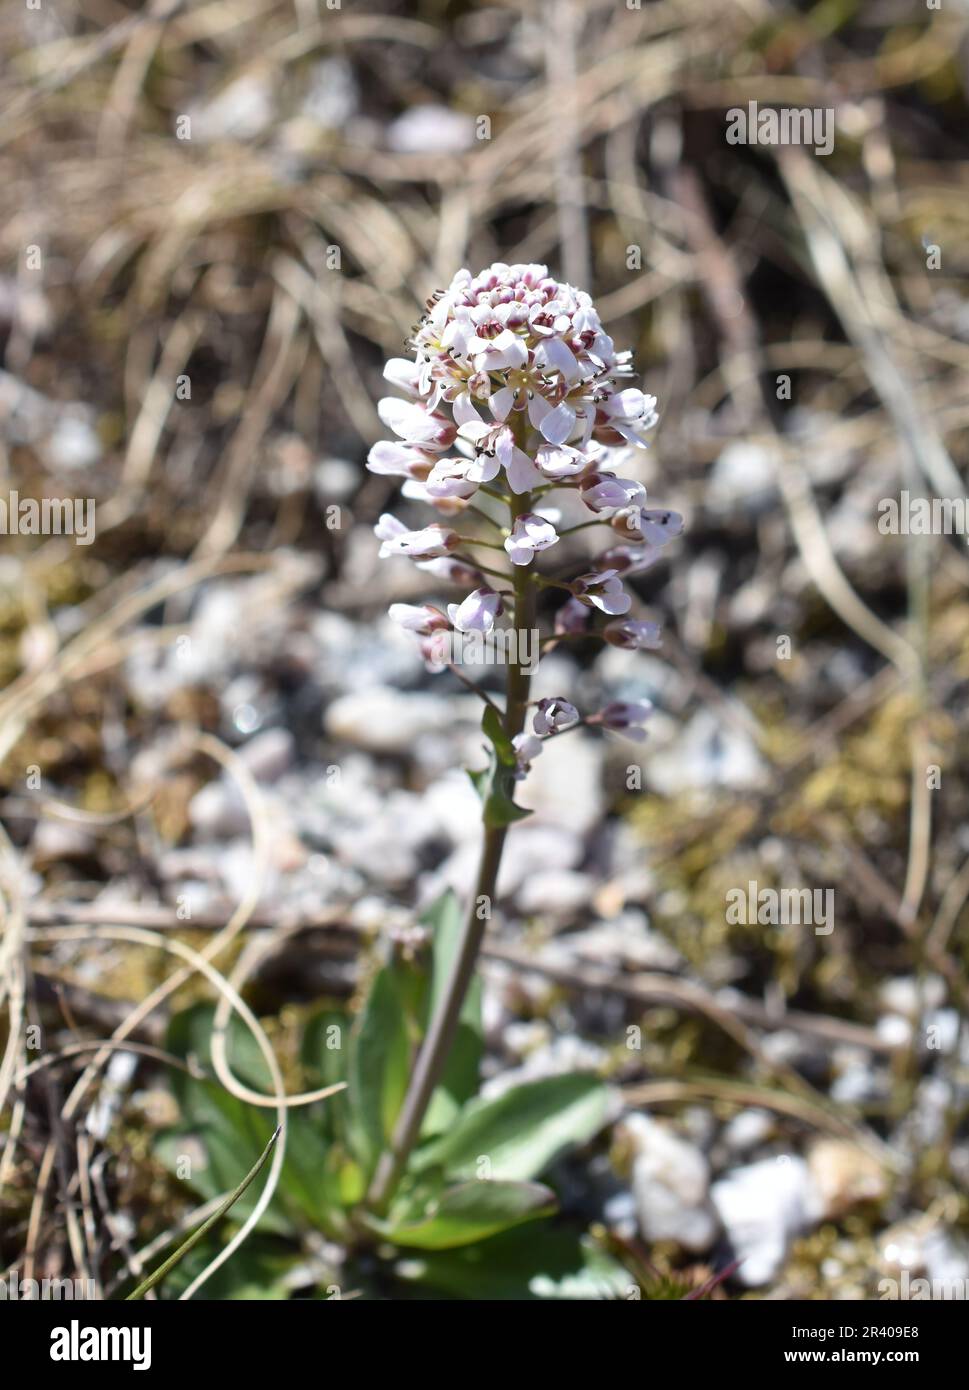 Alpine Penny-cress Noccaea caerulescens early spring flower Stock Photo